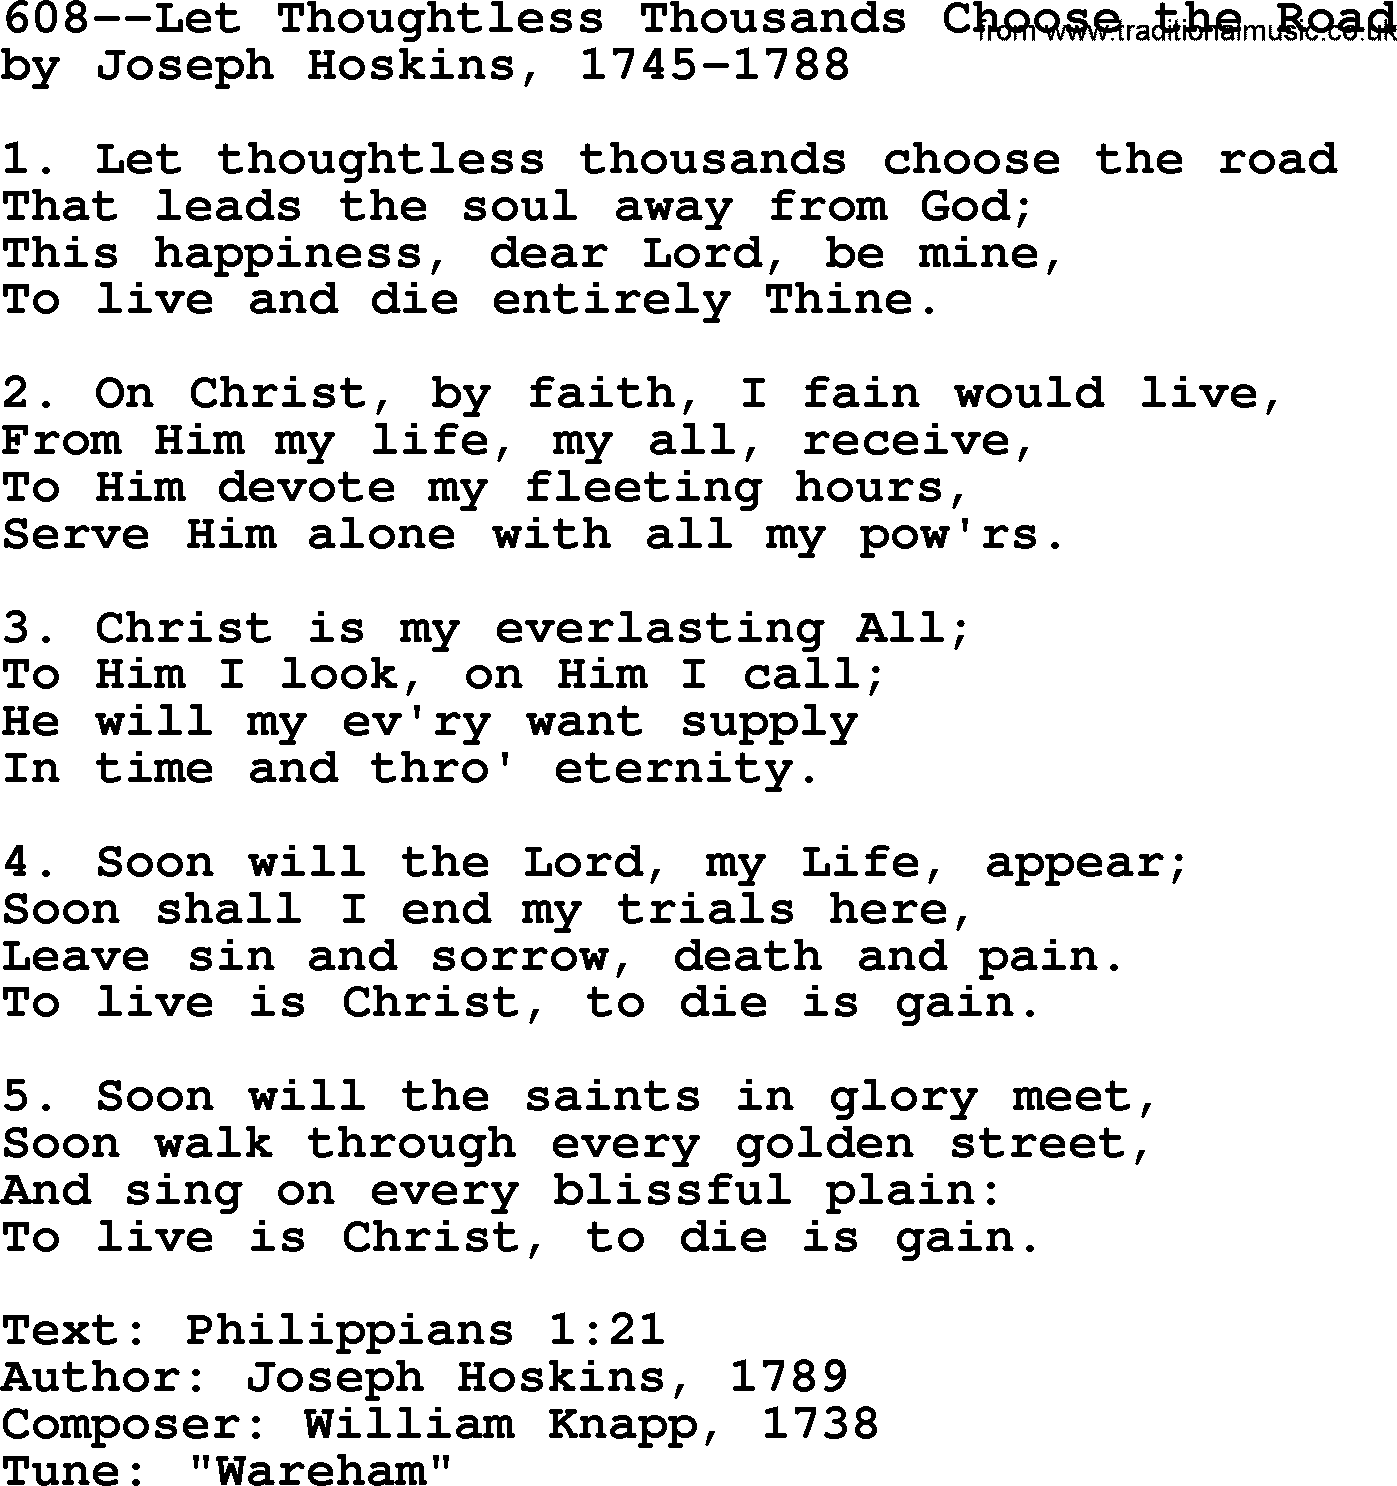 Lutheran Hymn: 608--Let Thoughtless Thousands Choose the Road.txt lyrics with PDF